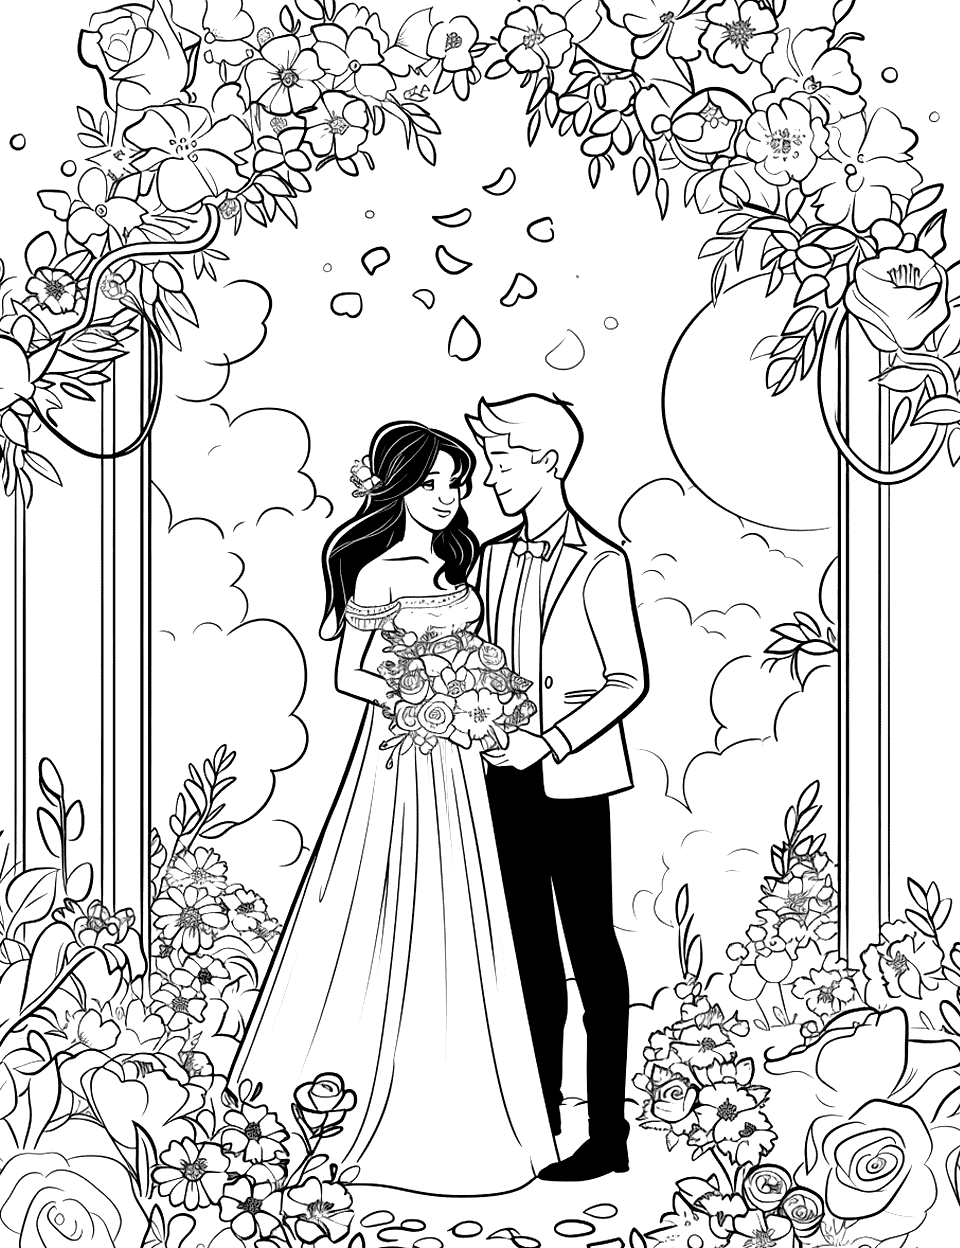 Garden Wedding Bliss Coloring Page - A couple saying their vows in a lush garden full of flowers.